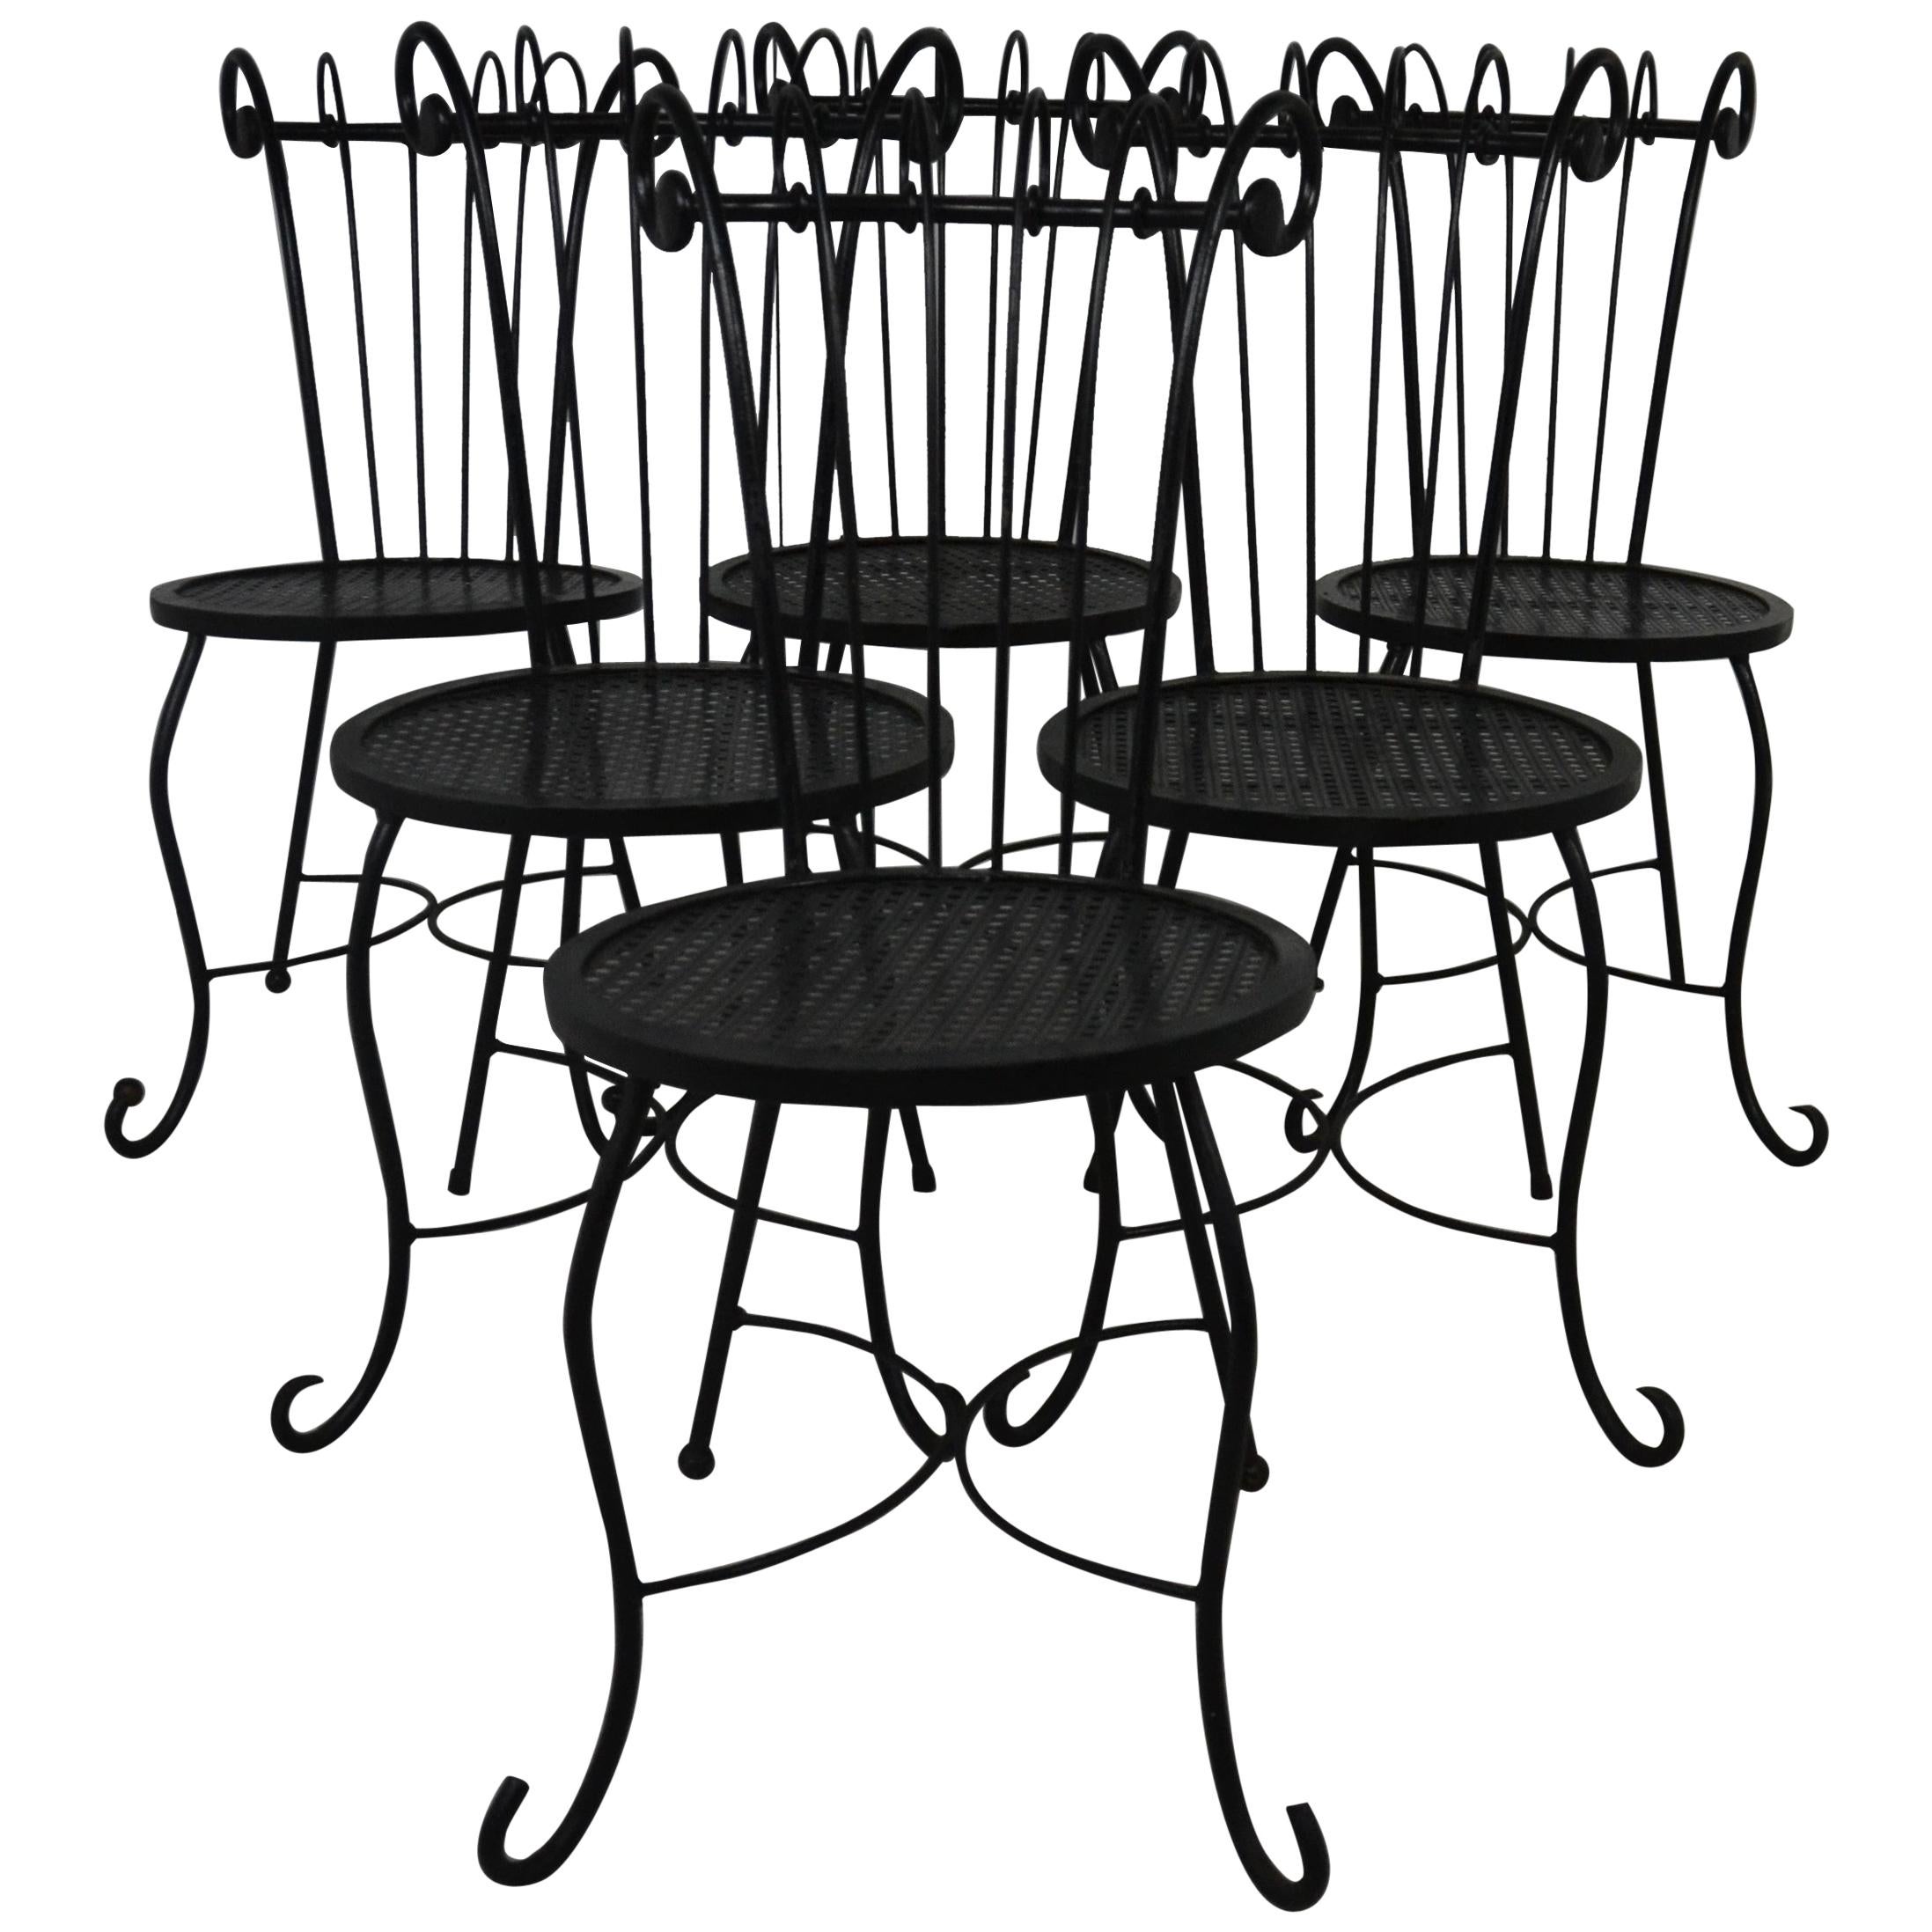 Vintage Iron Patio Chairs Set of 6